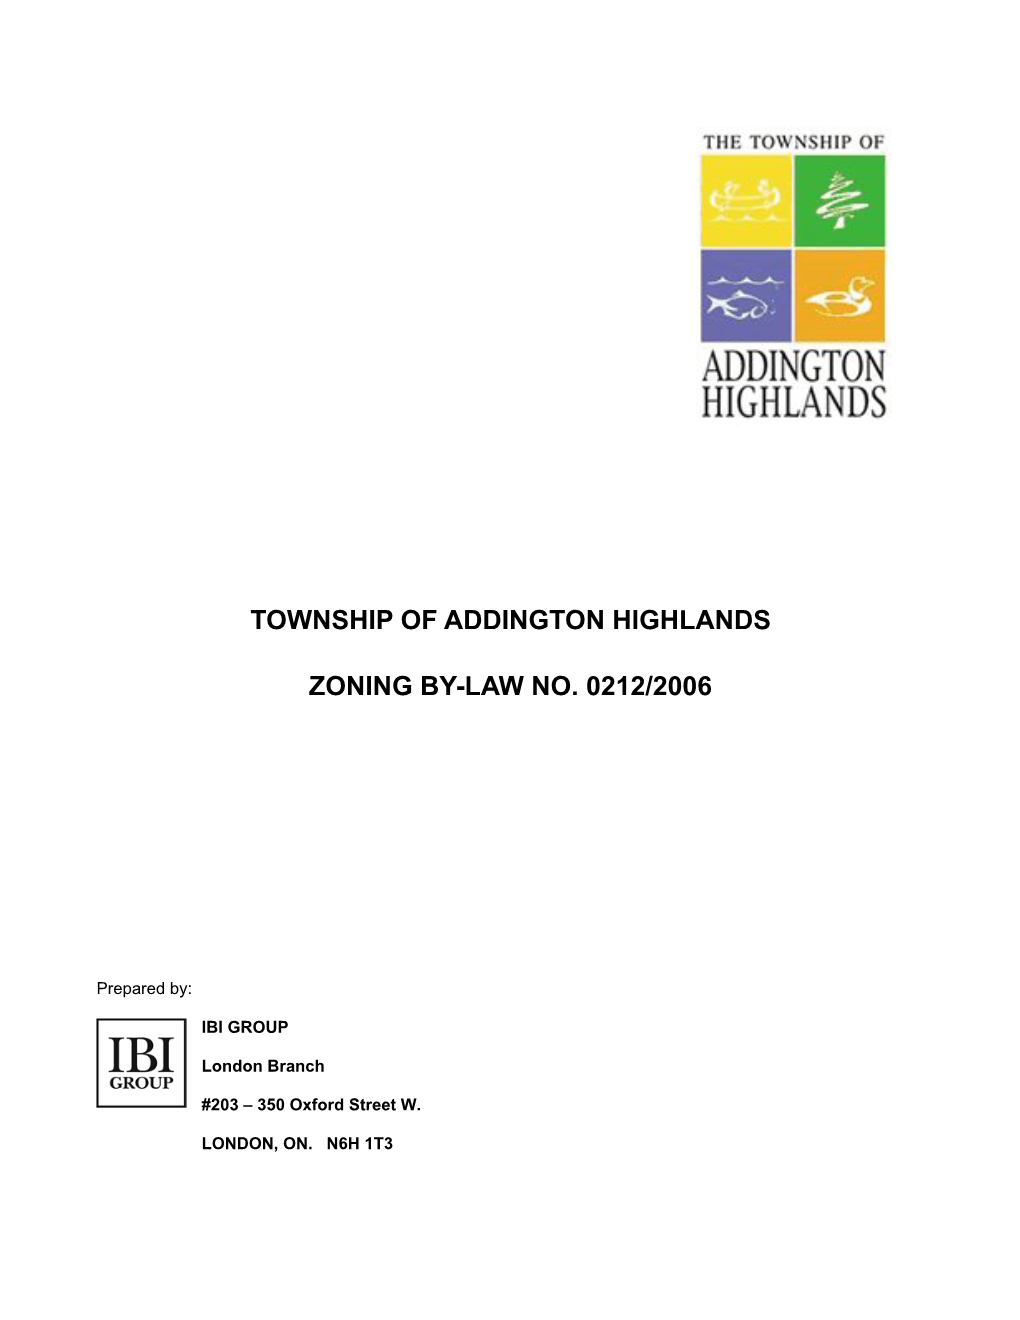 Township of Addington Highlands Zoning By-Law No